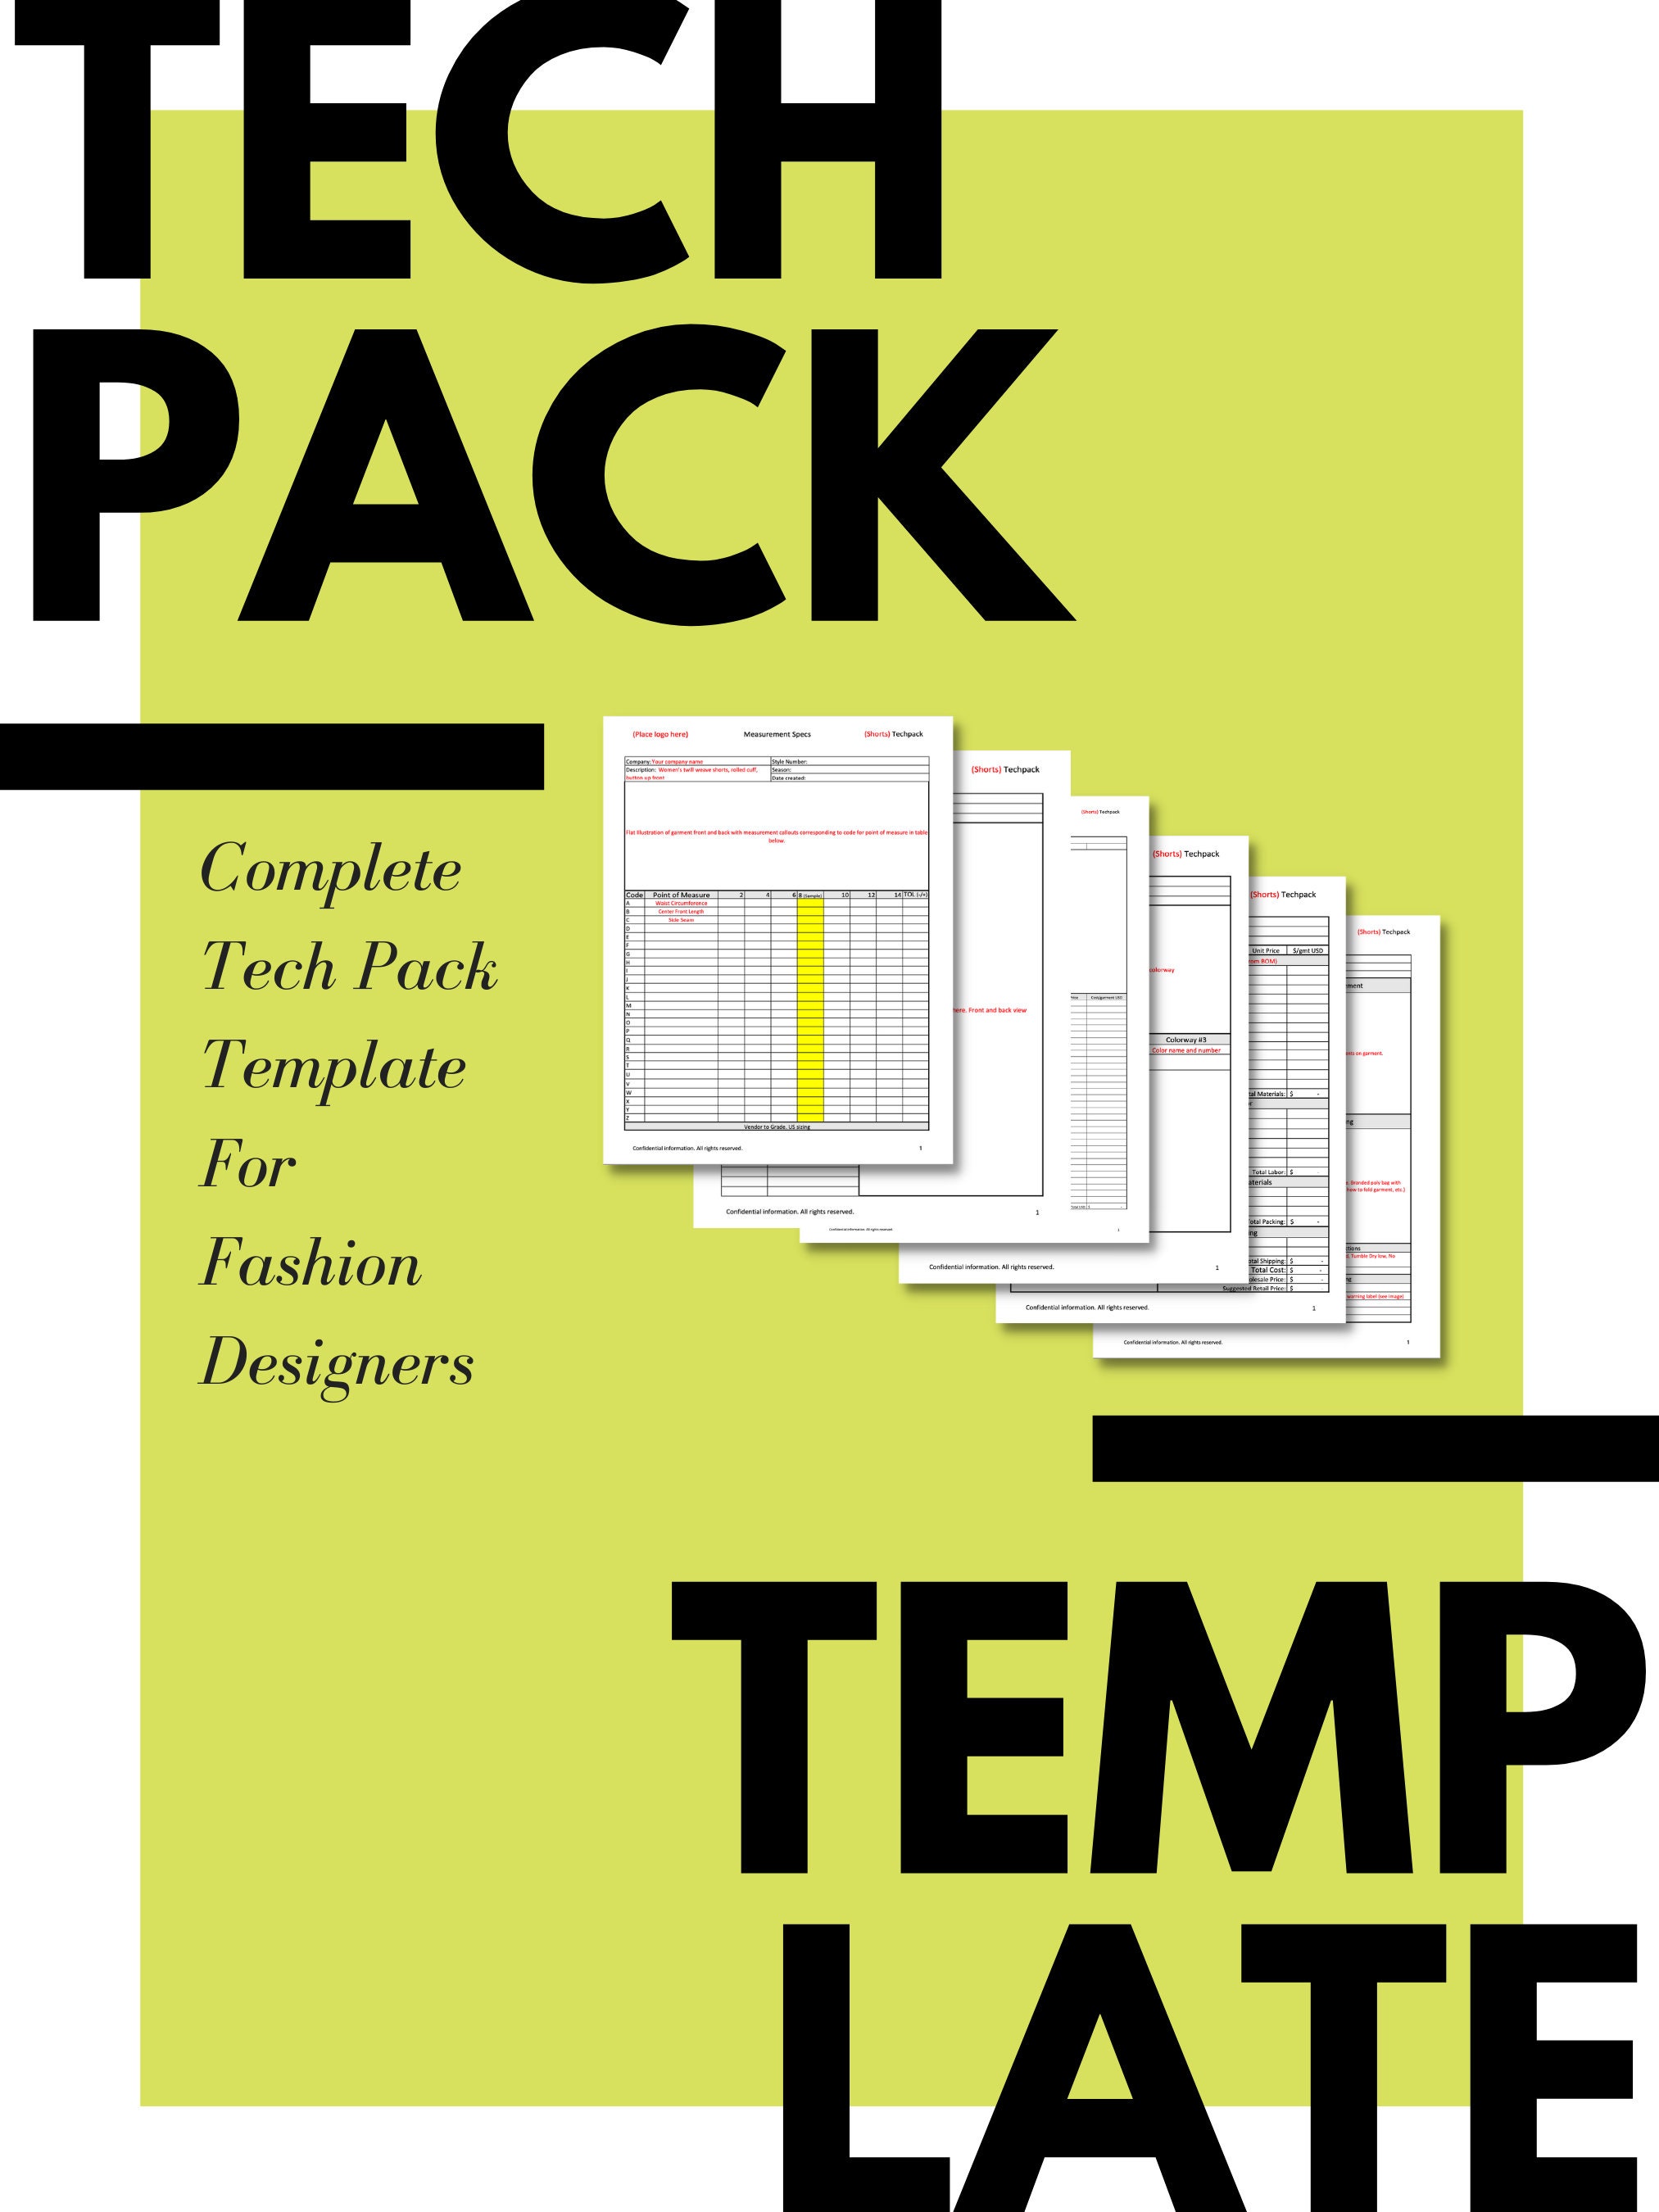 complete-tech-pack-excel-template-for-apparel-industry-fashion